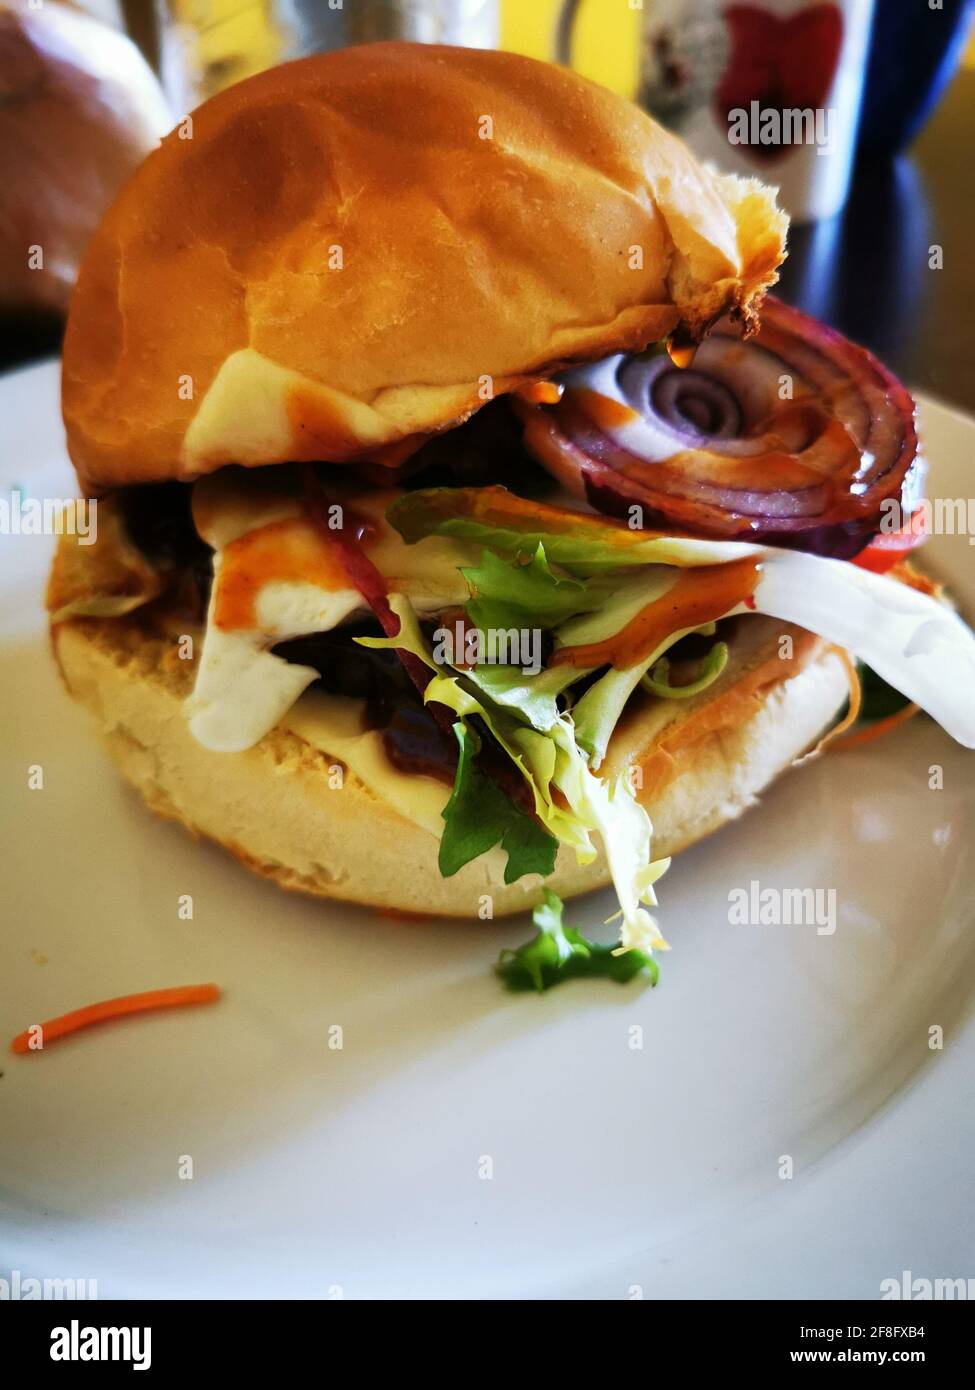 Closeup of a delicious vegetarian burger served at a health restaurant Stock Photo